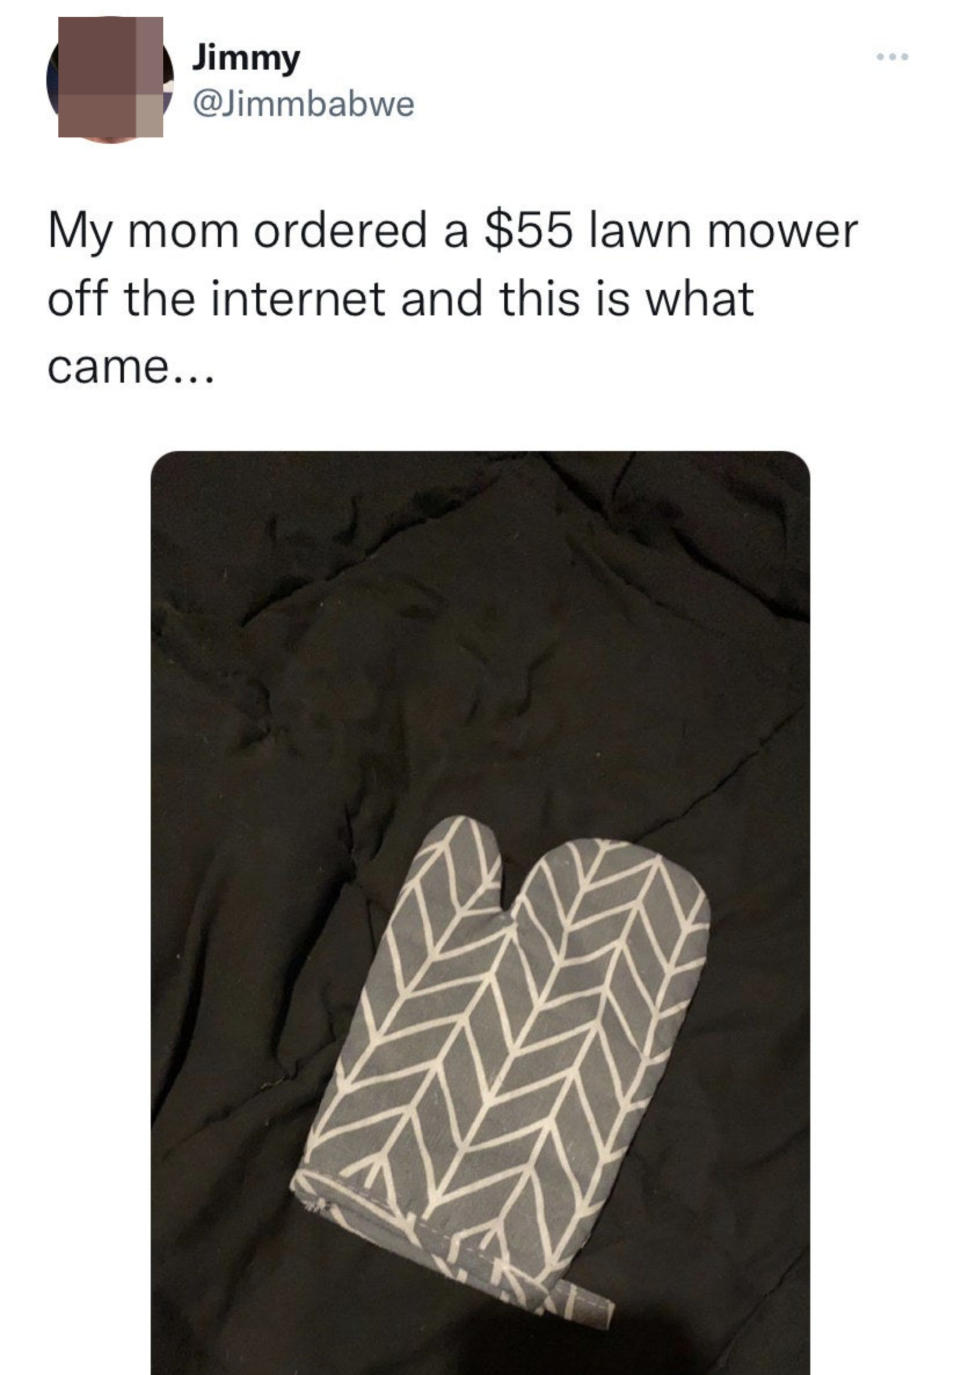 Yes, an oven mitt is now the opposite of a lawn mower.